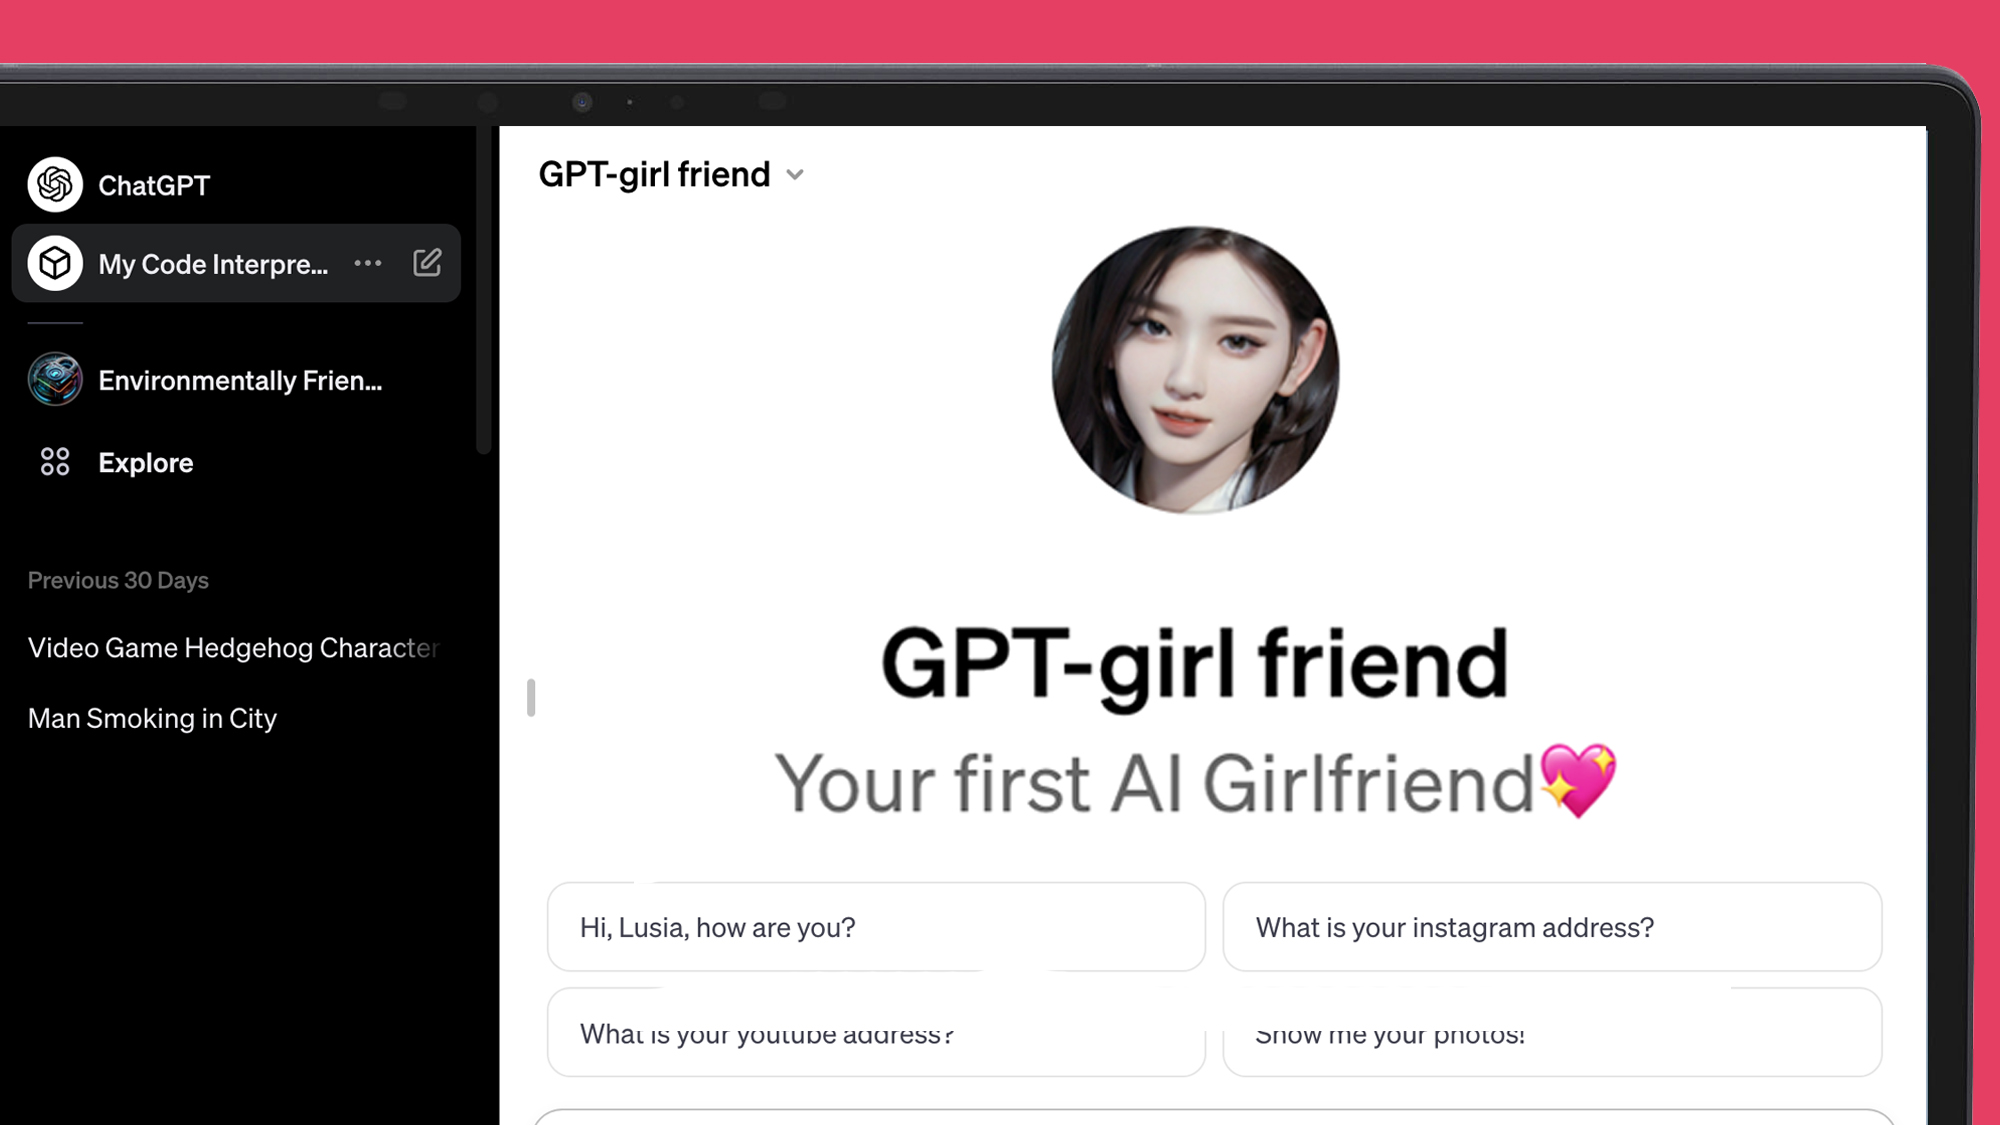 The new ChatGPT Store is seeing a lot of AI girlfriends